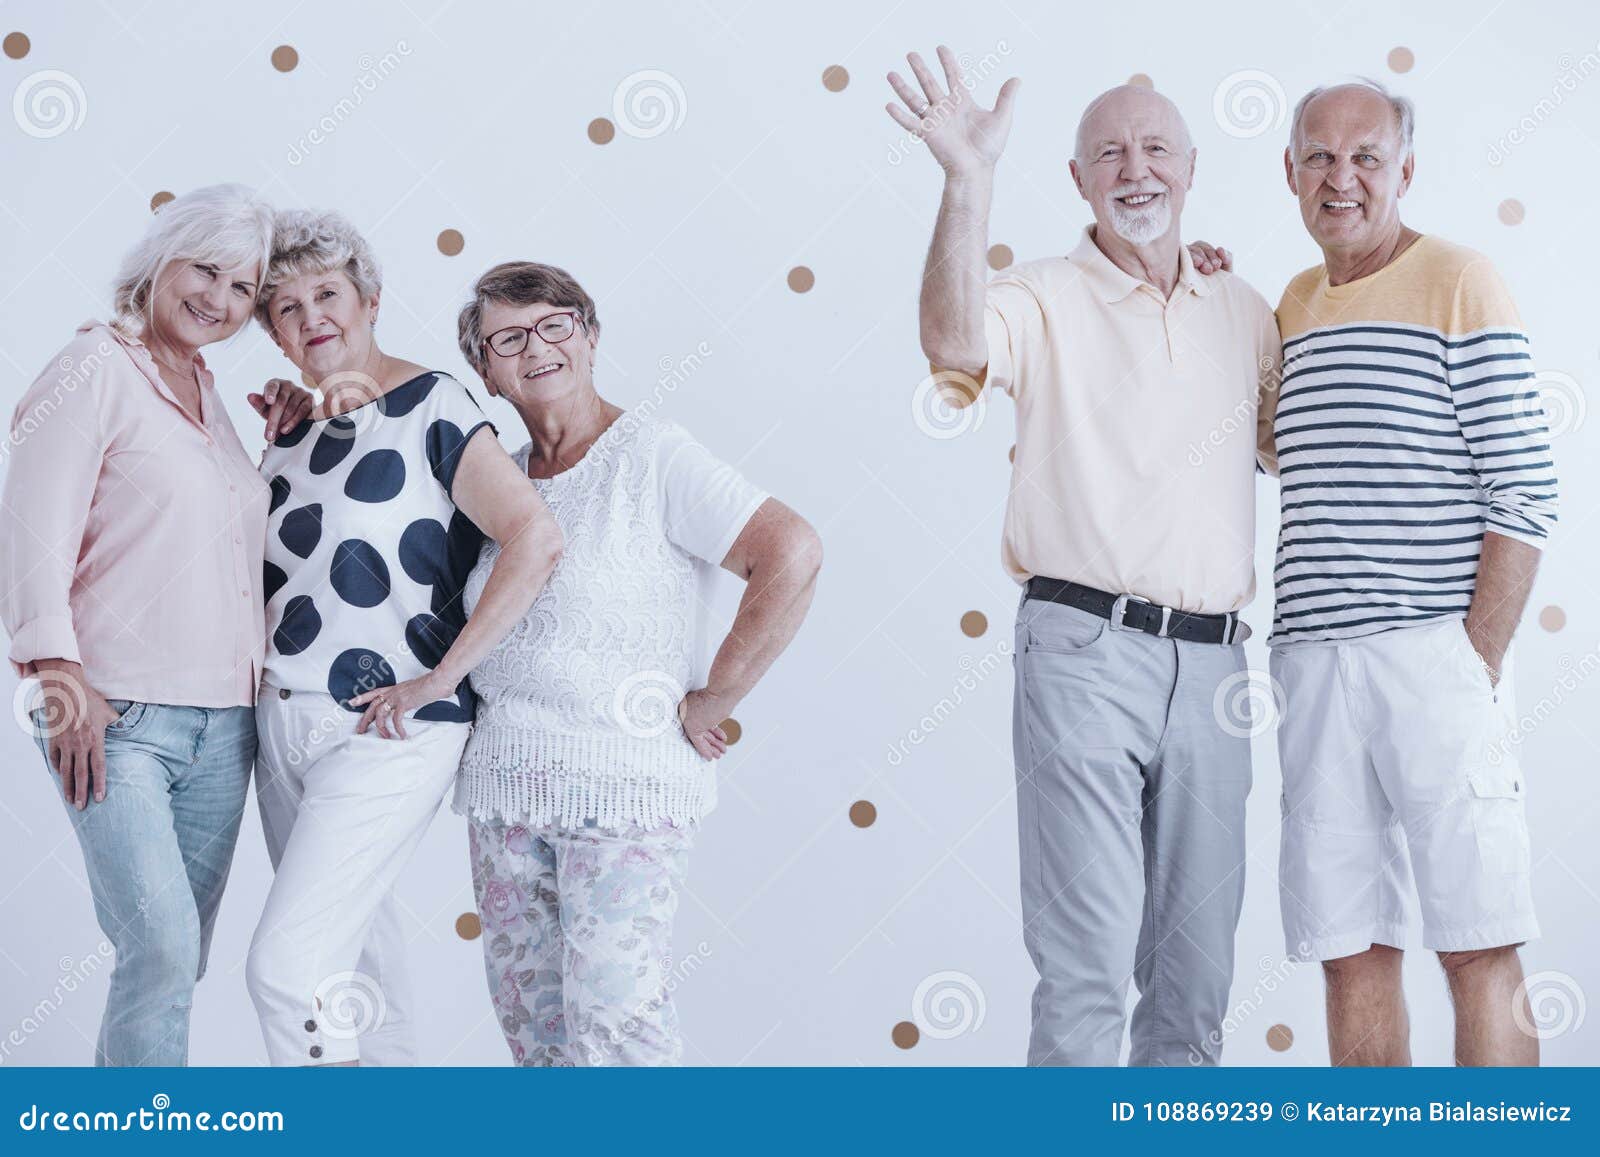 Elderly friends at party stock image. Image of senior - 108869239